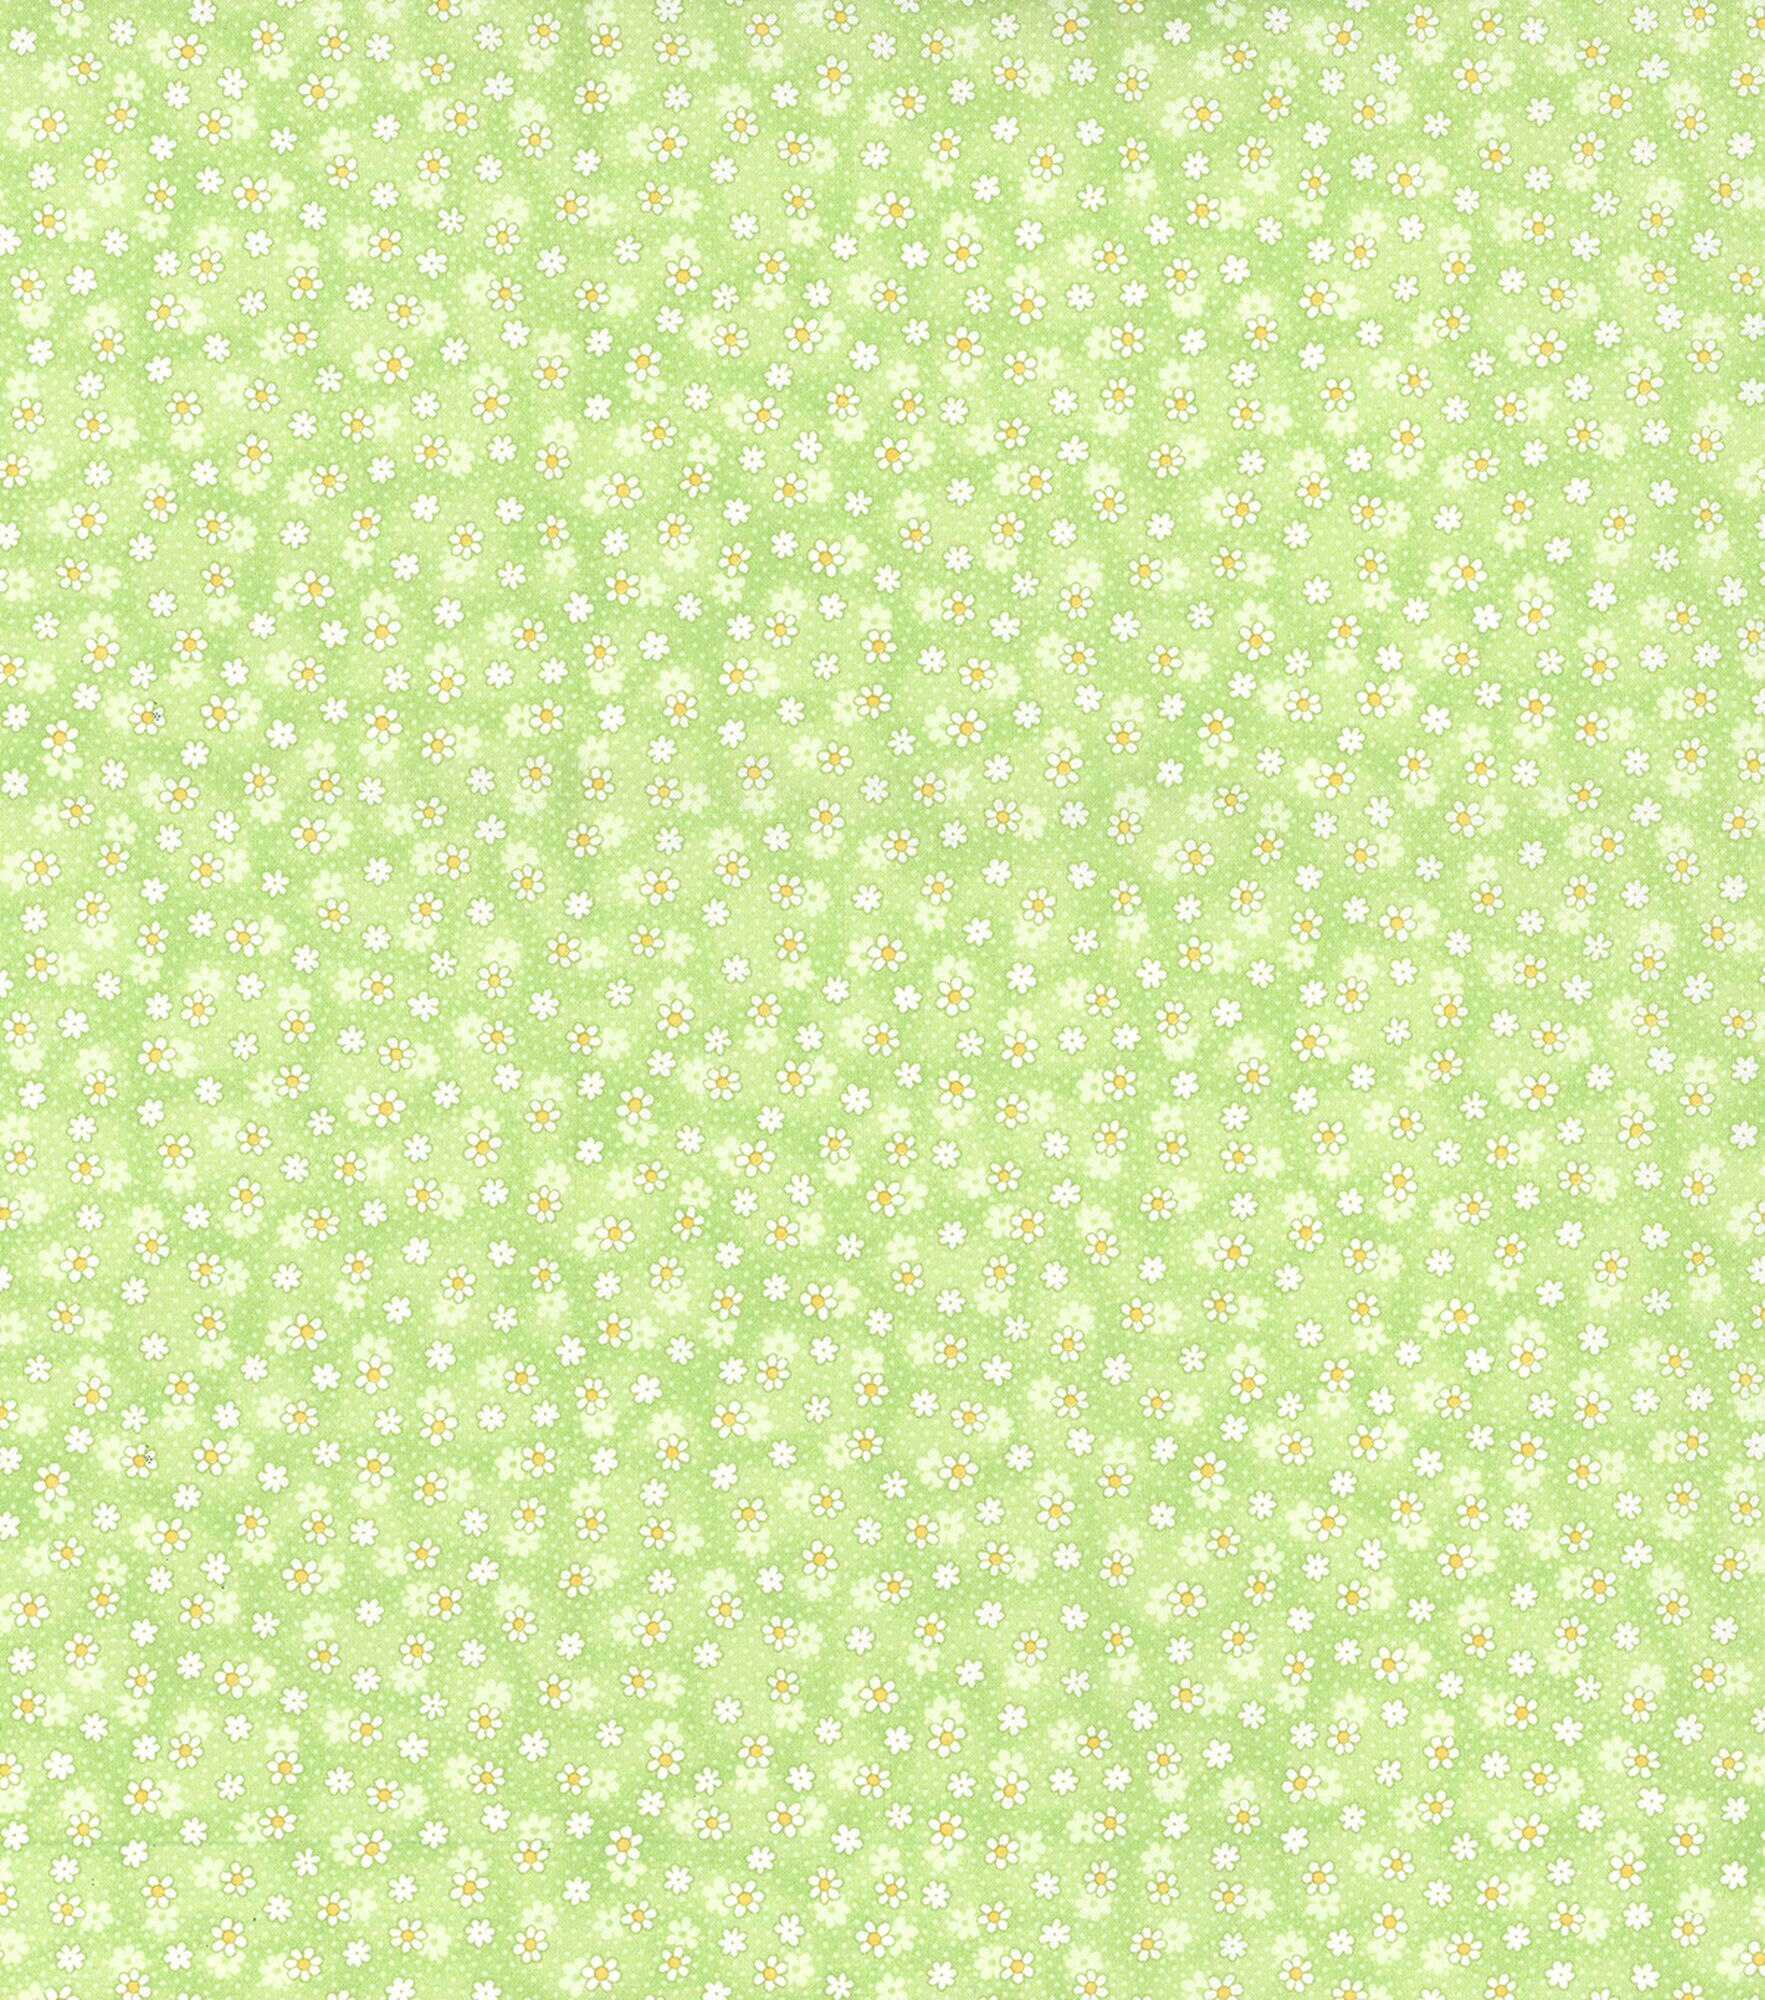 Fabric Traditions Small Daisies Cotton Fabric by Keepsake Calico, Green, hi-res